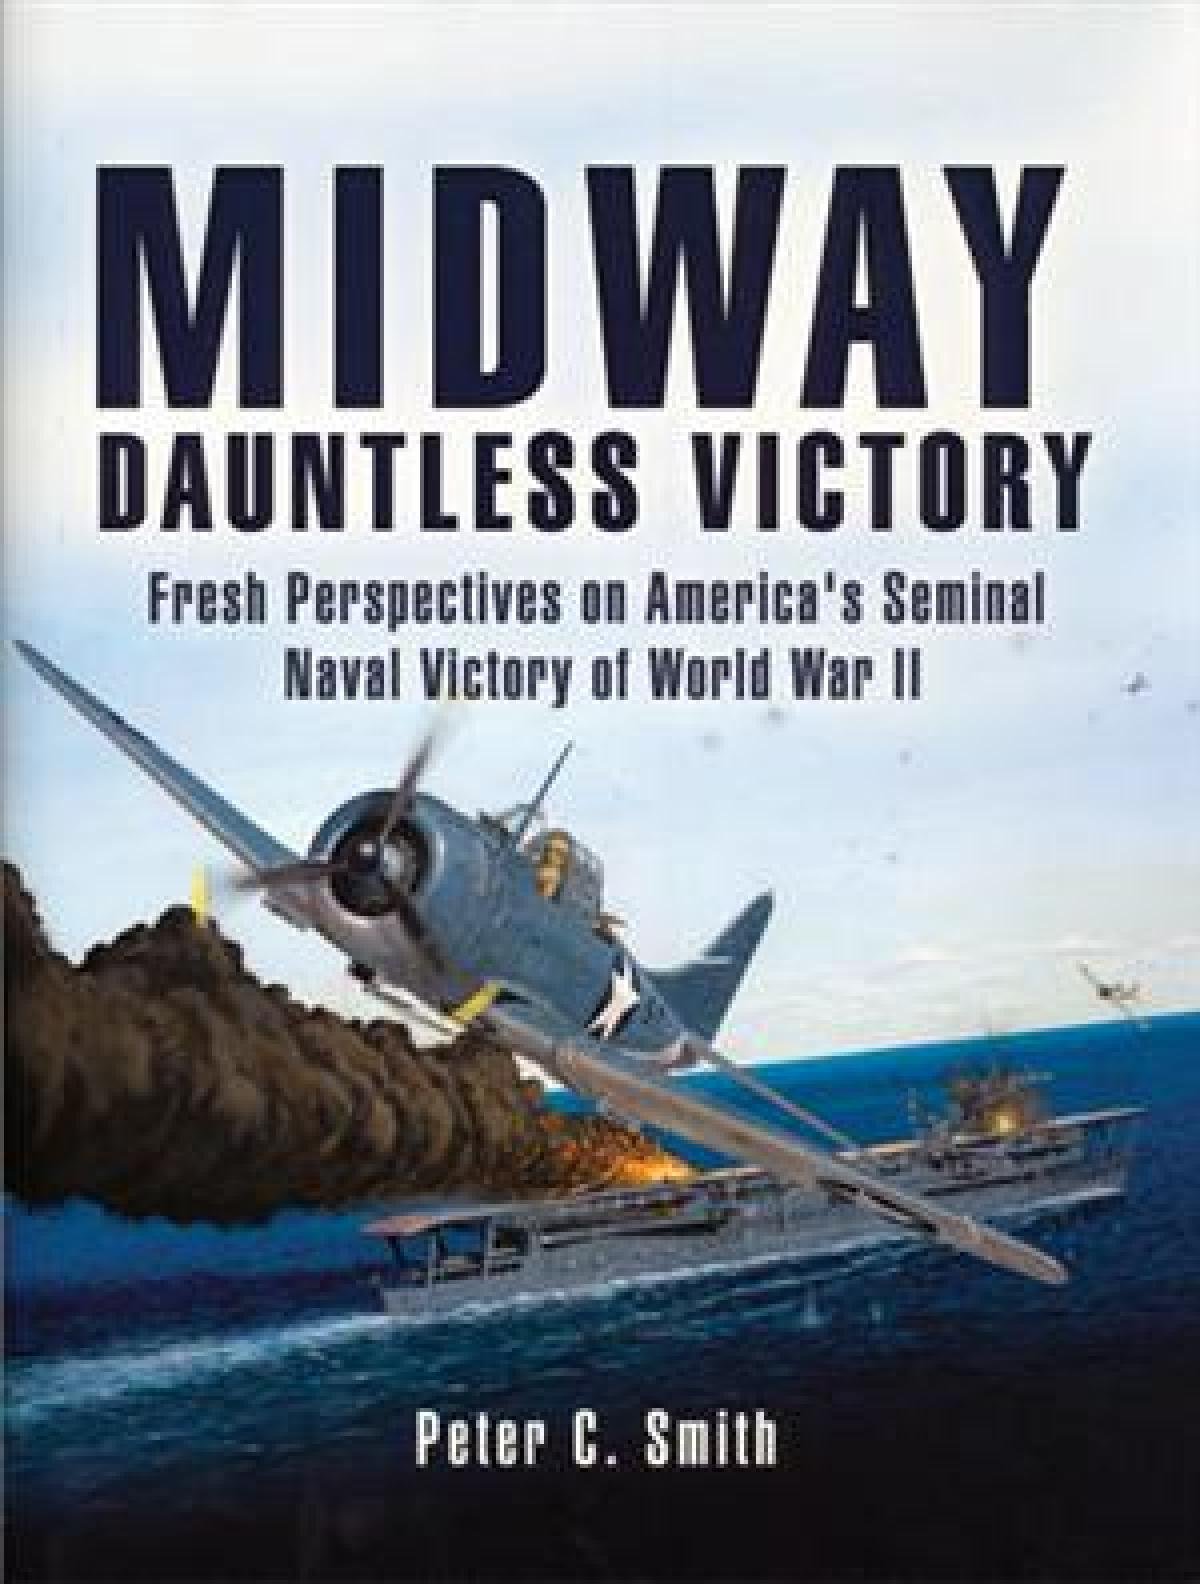 Book Reviews  Naval History Magazine - August 2008 Volume 22, Number 4